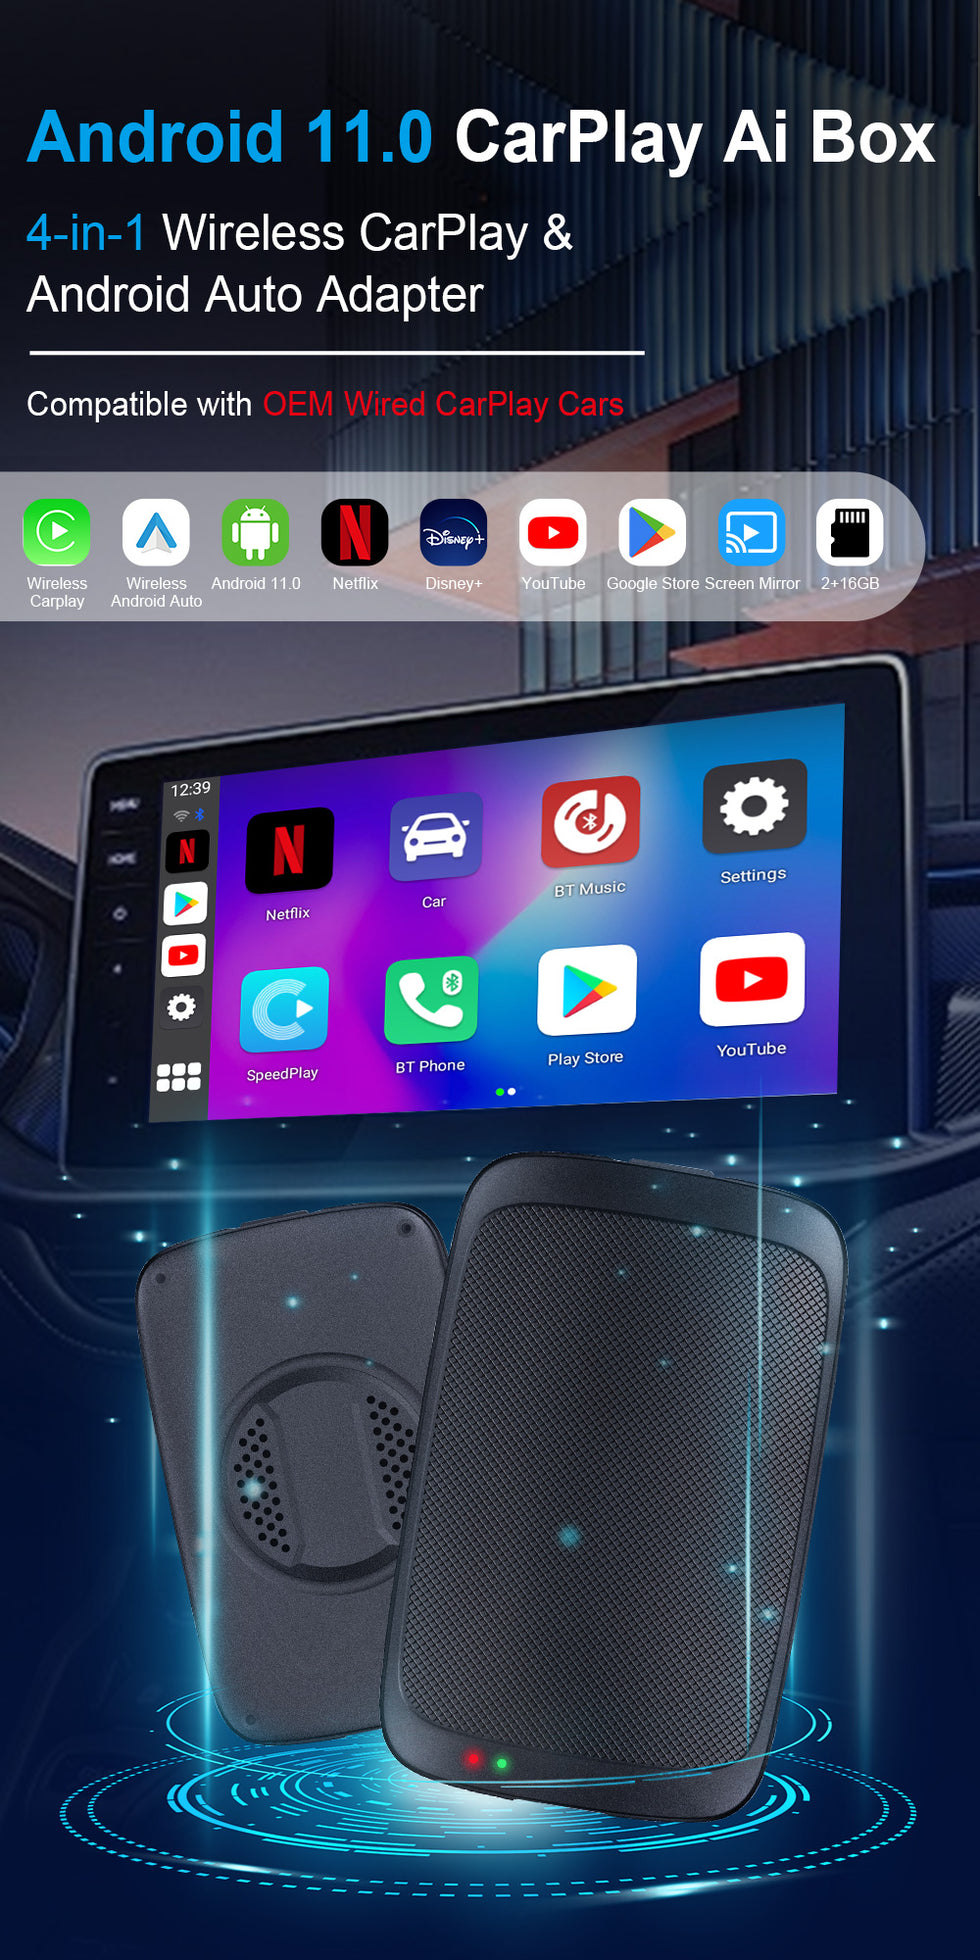 G4-Android-11-Smart-AI-Box-Banner-Mobile